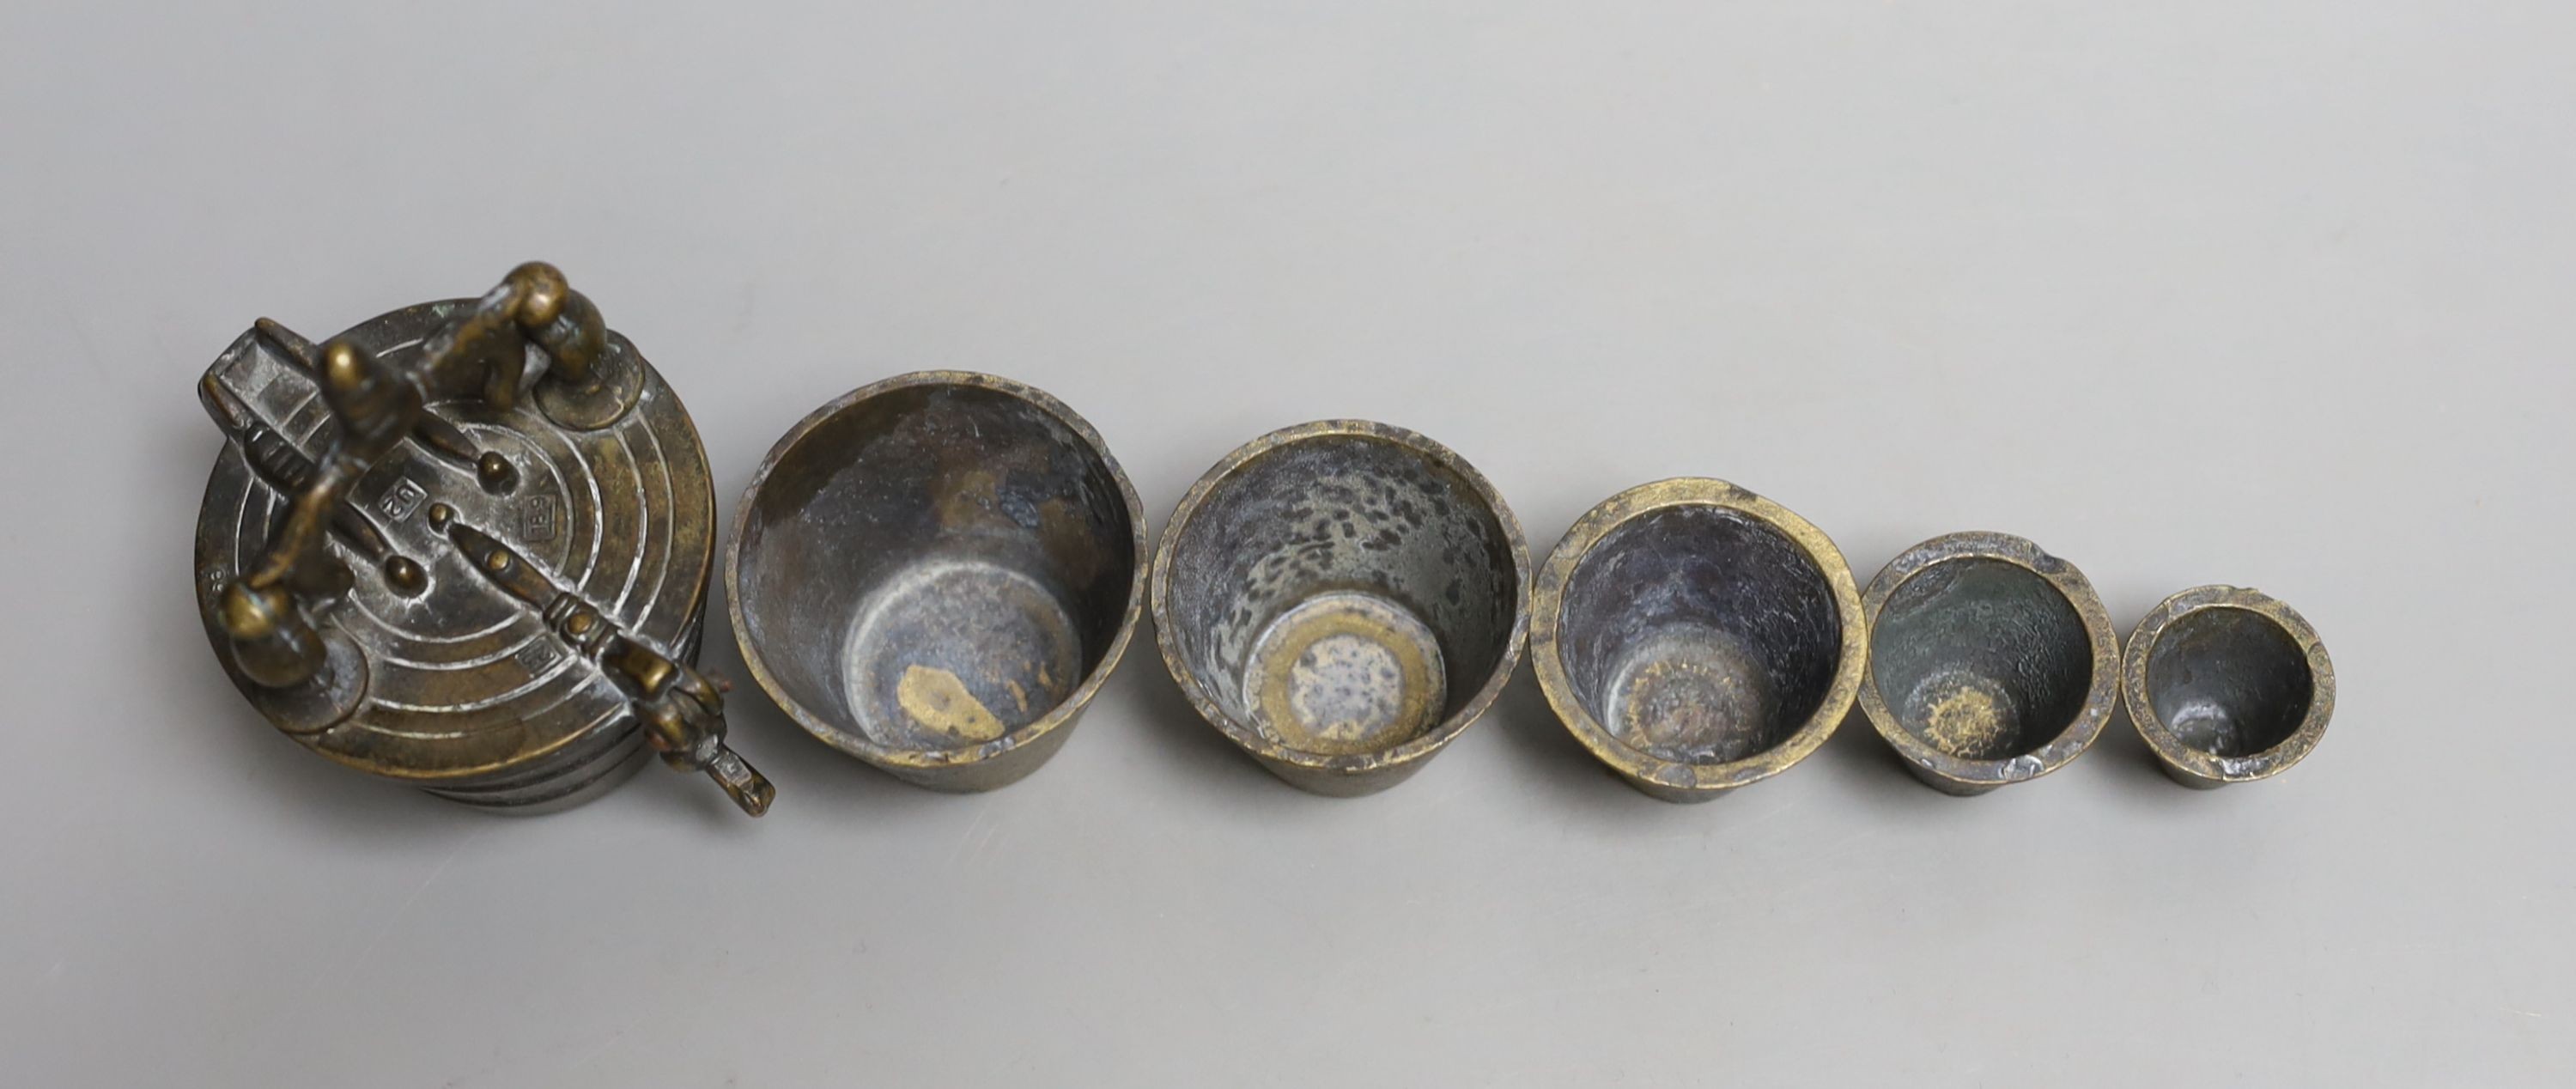 A nest of German bronze measures - Image 4 of 4